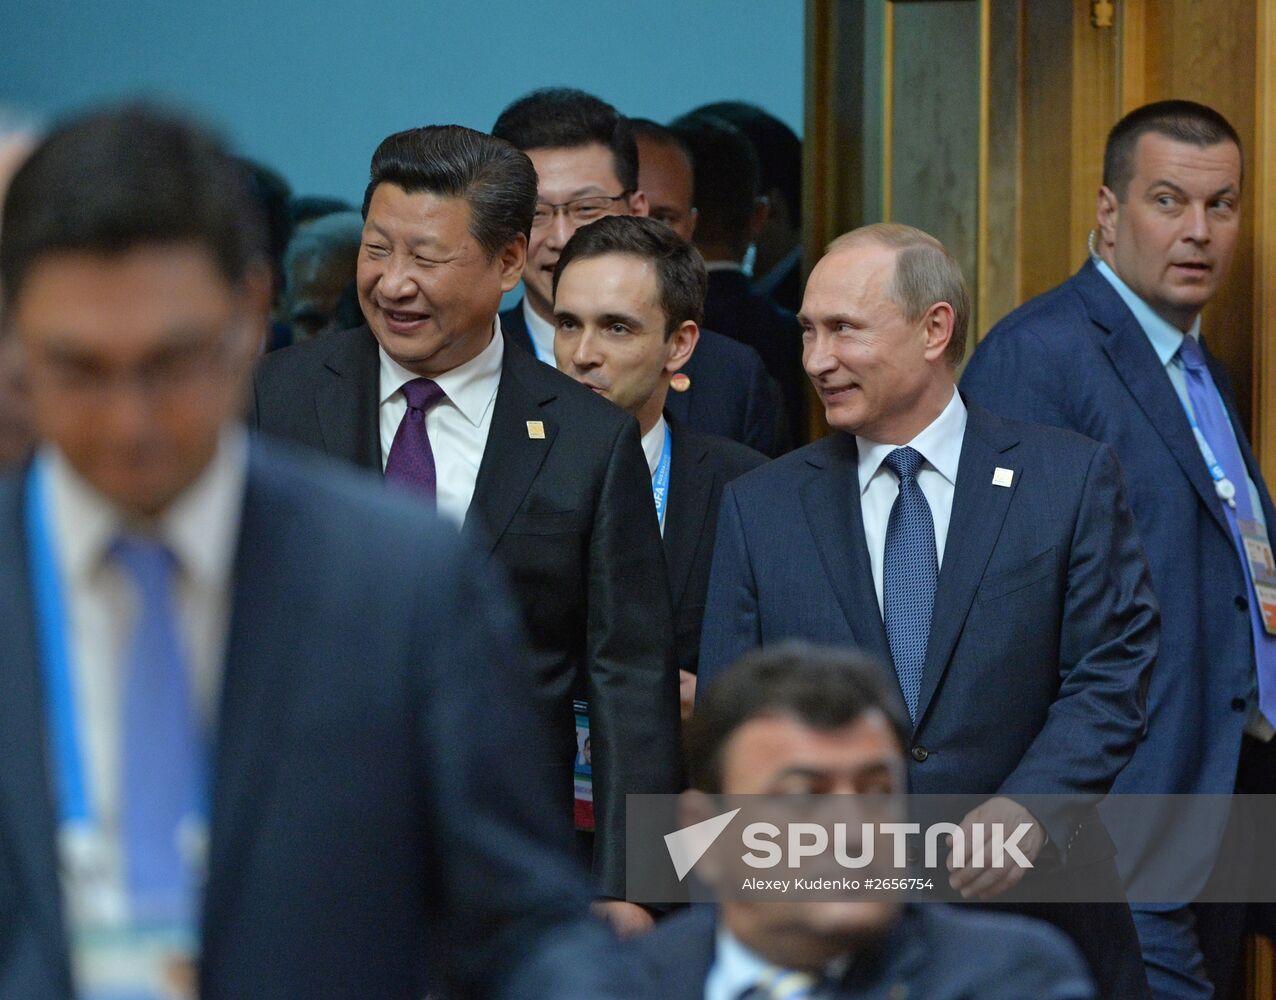 BRICS leaders meet with the leaders of the invited states